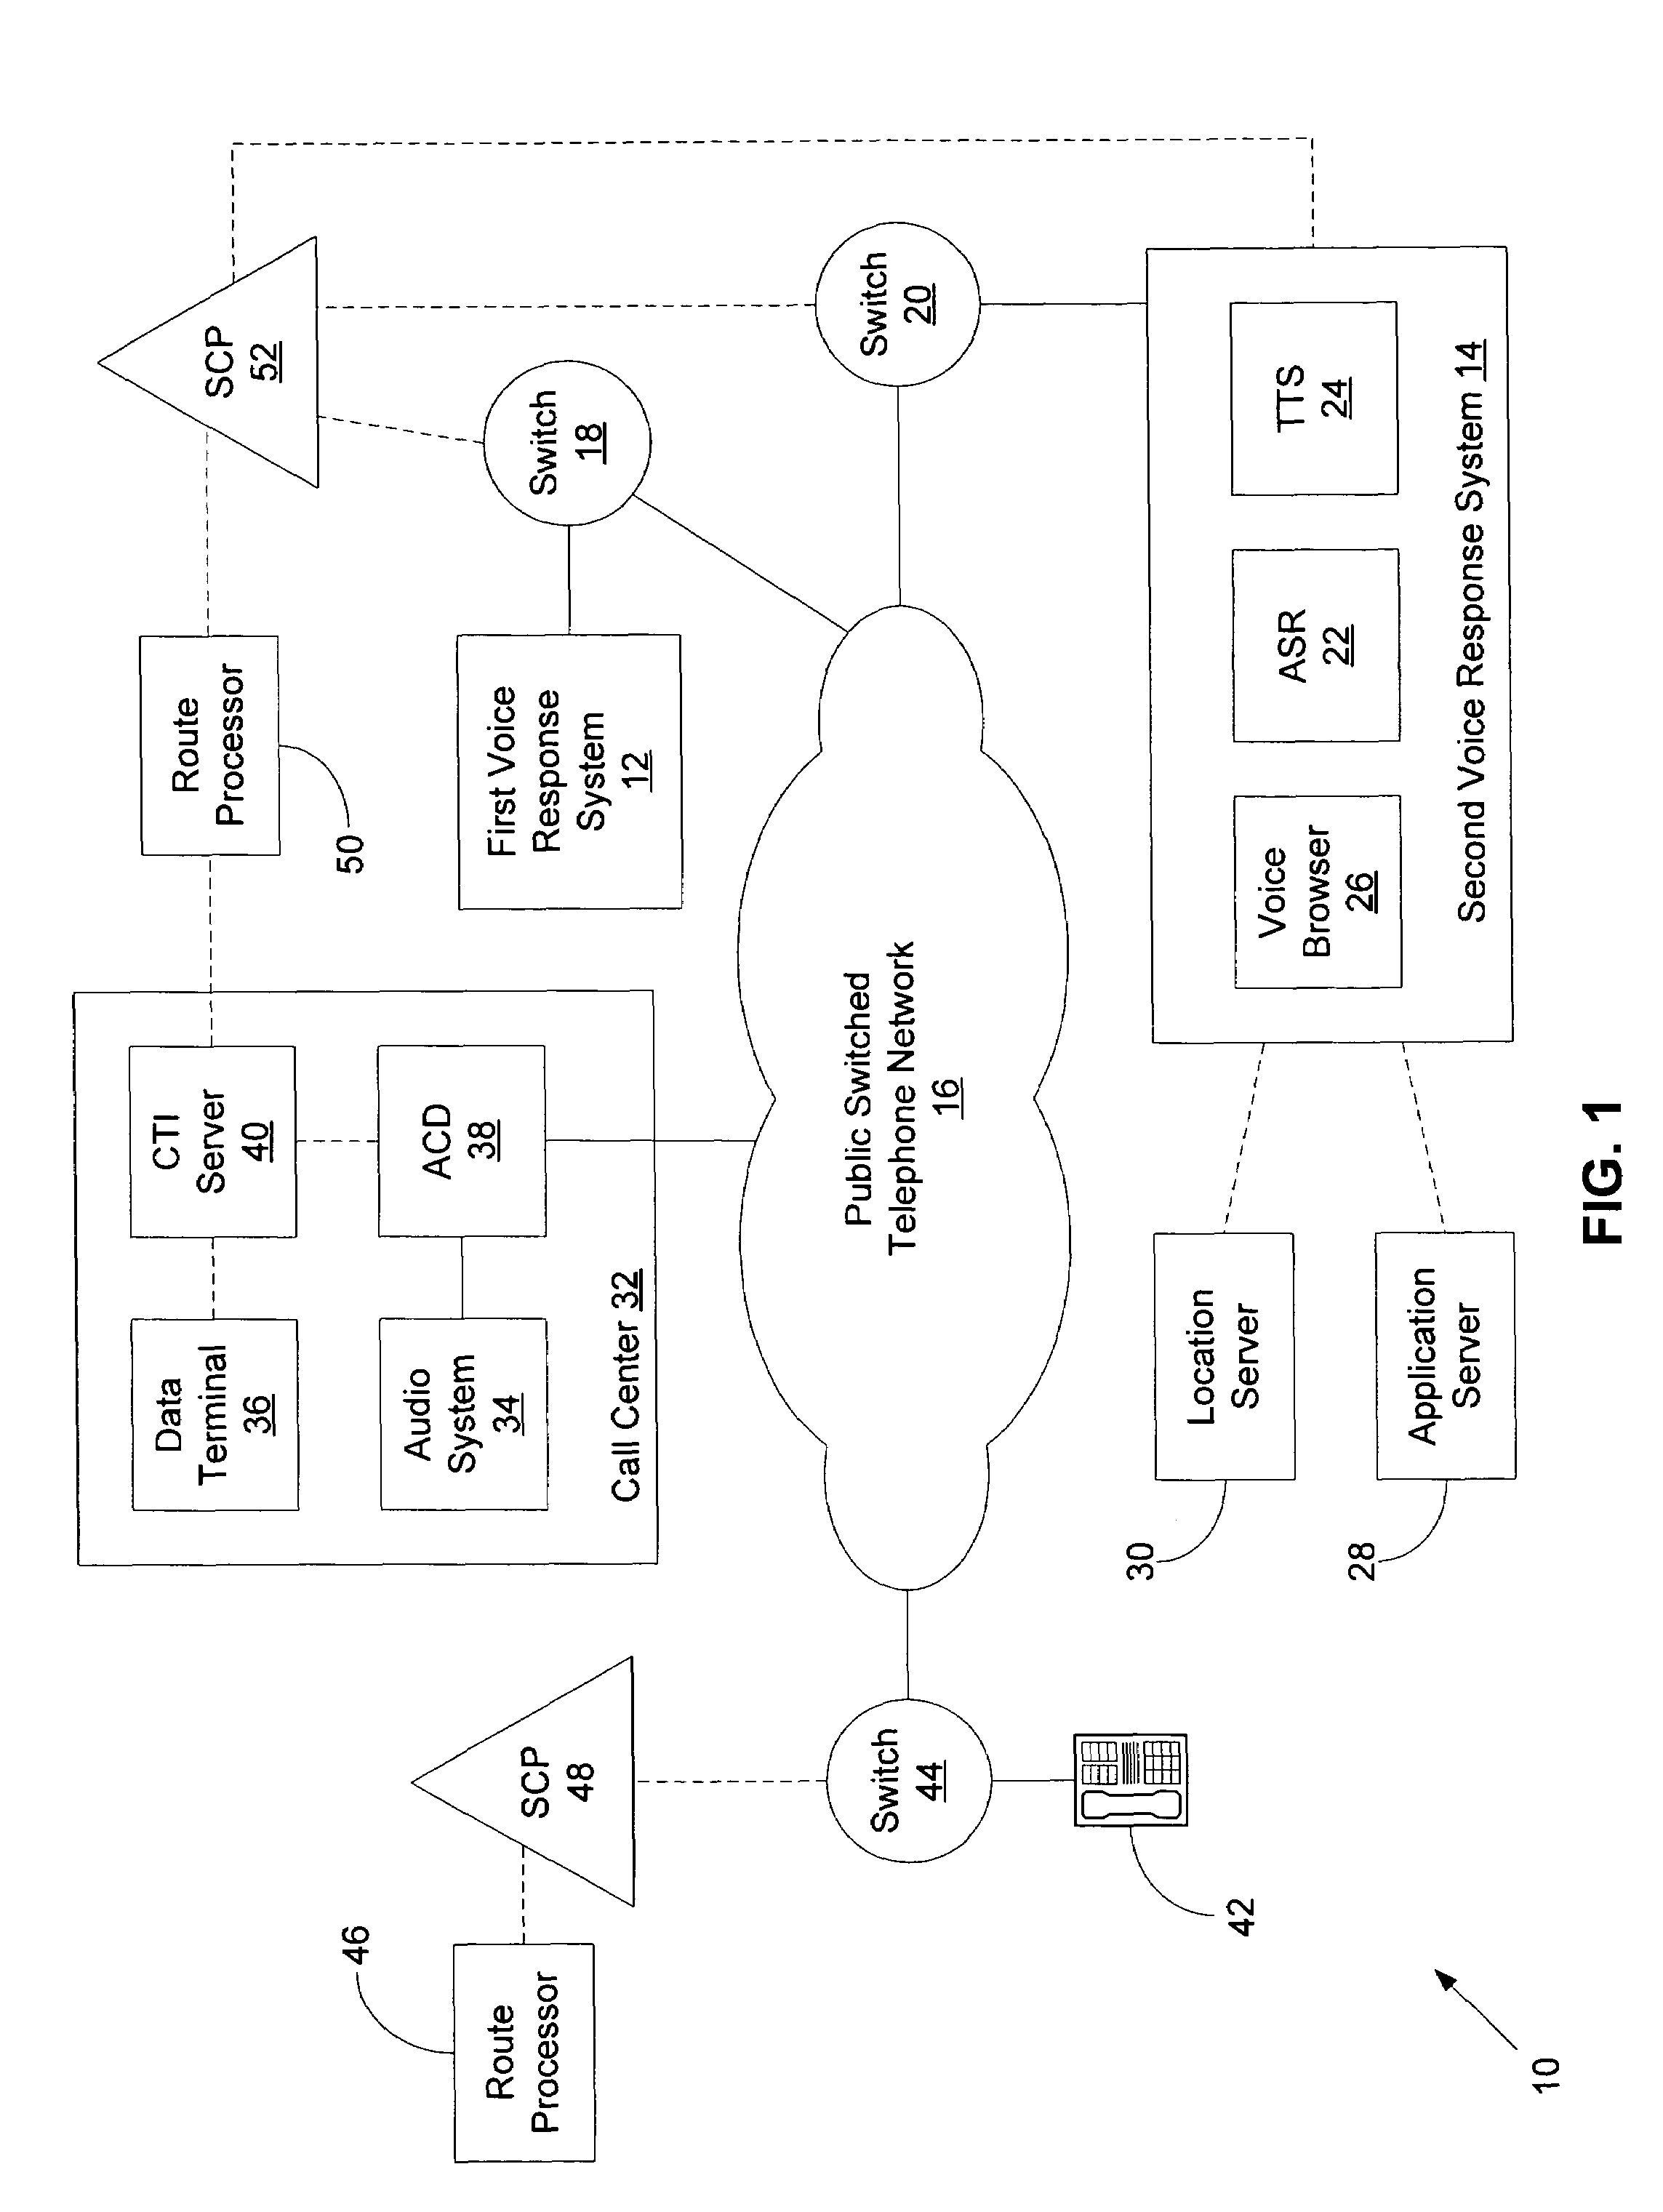 Method and system for operating interactive voice response systems tandem